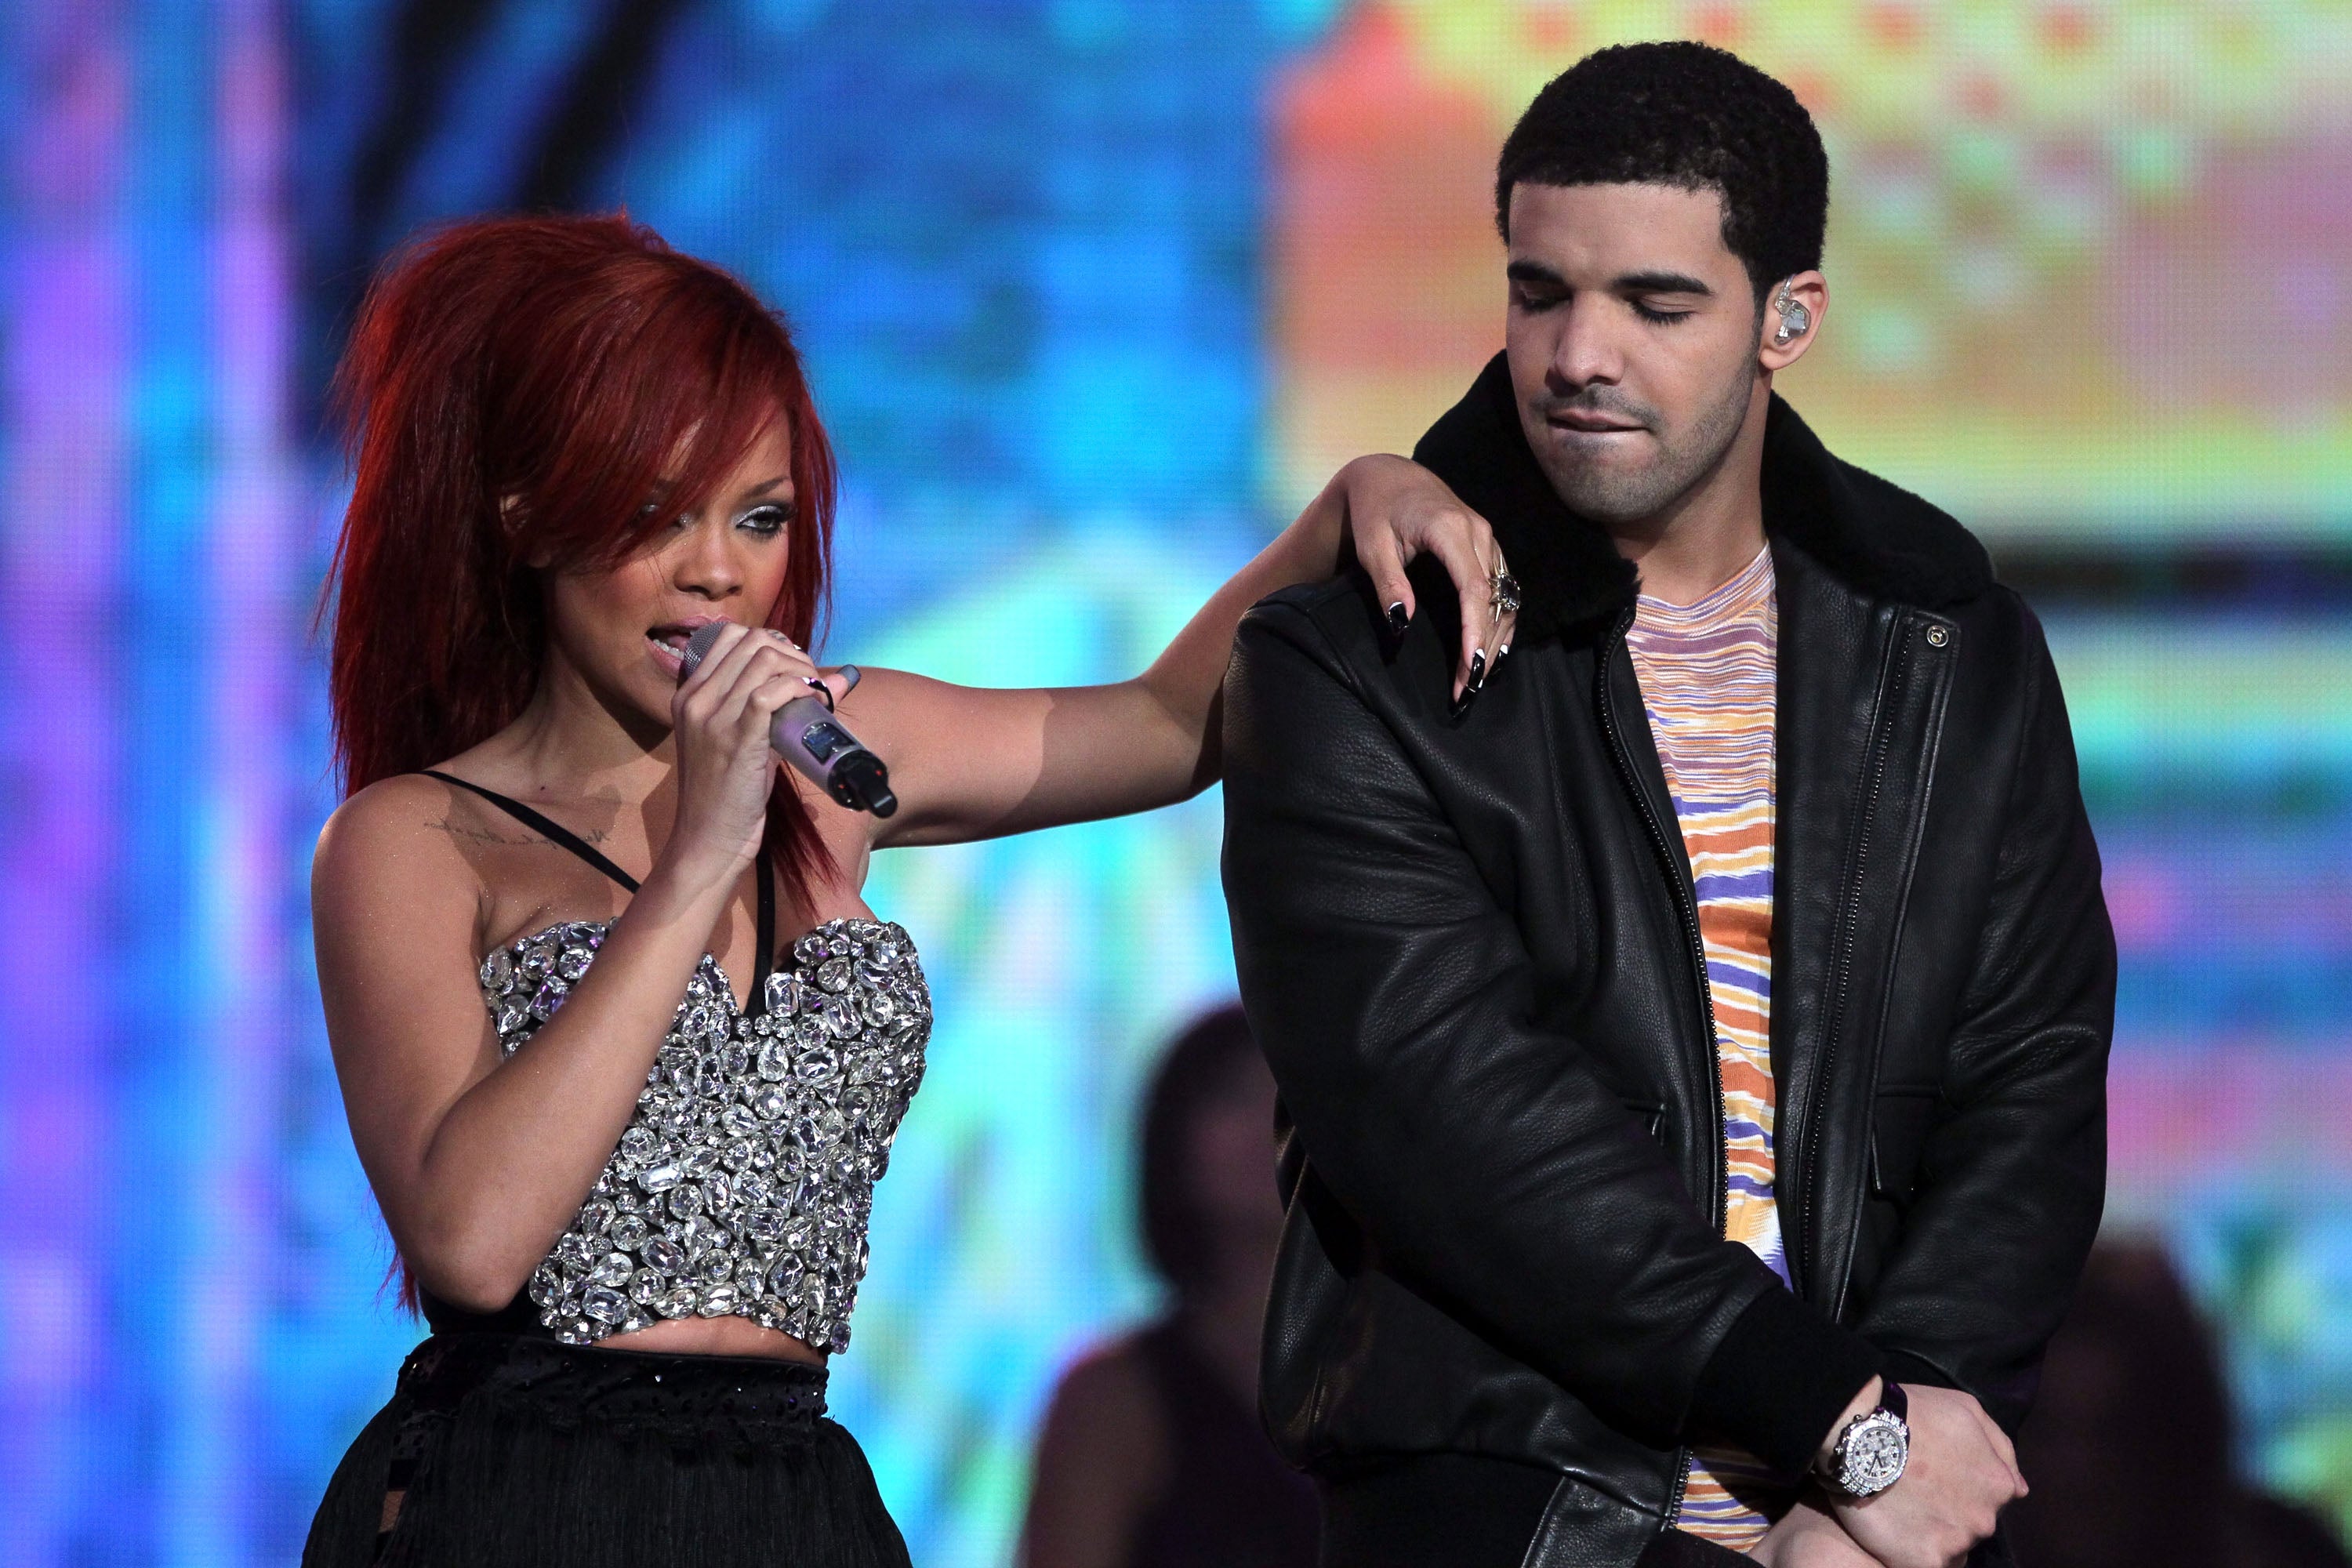 Drake performing with Rihanna in 2011